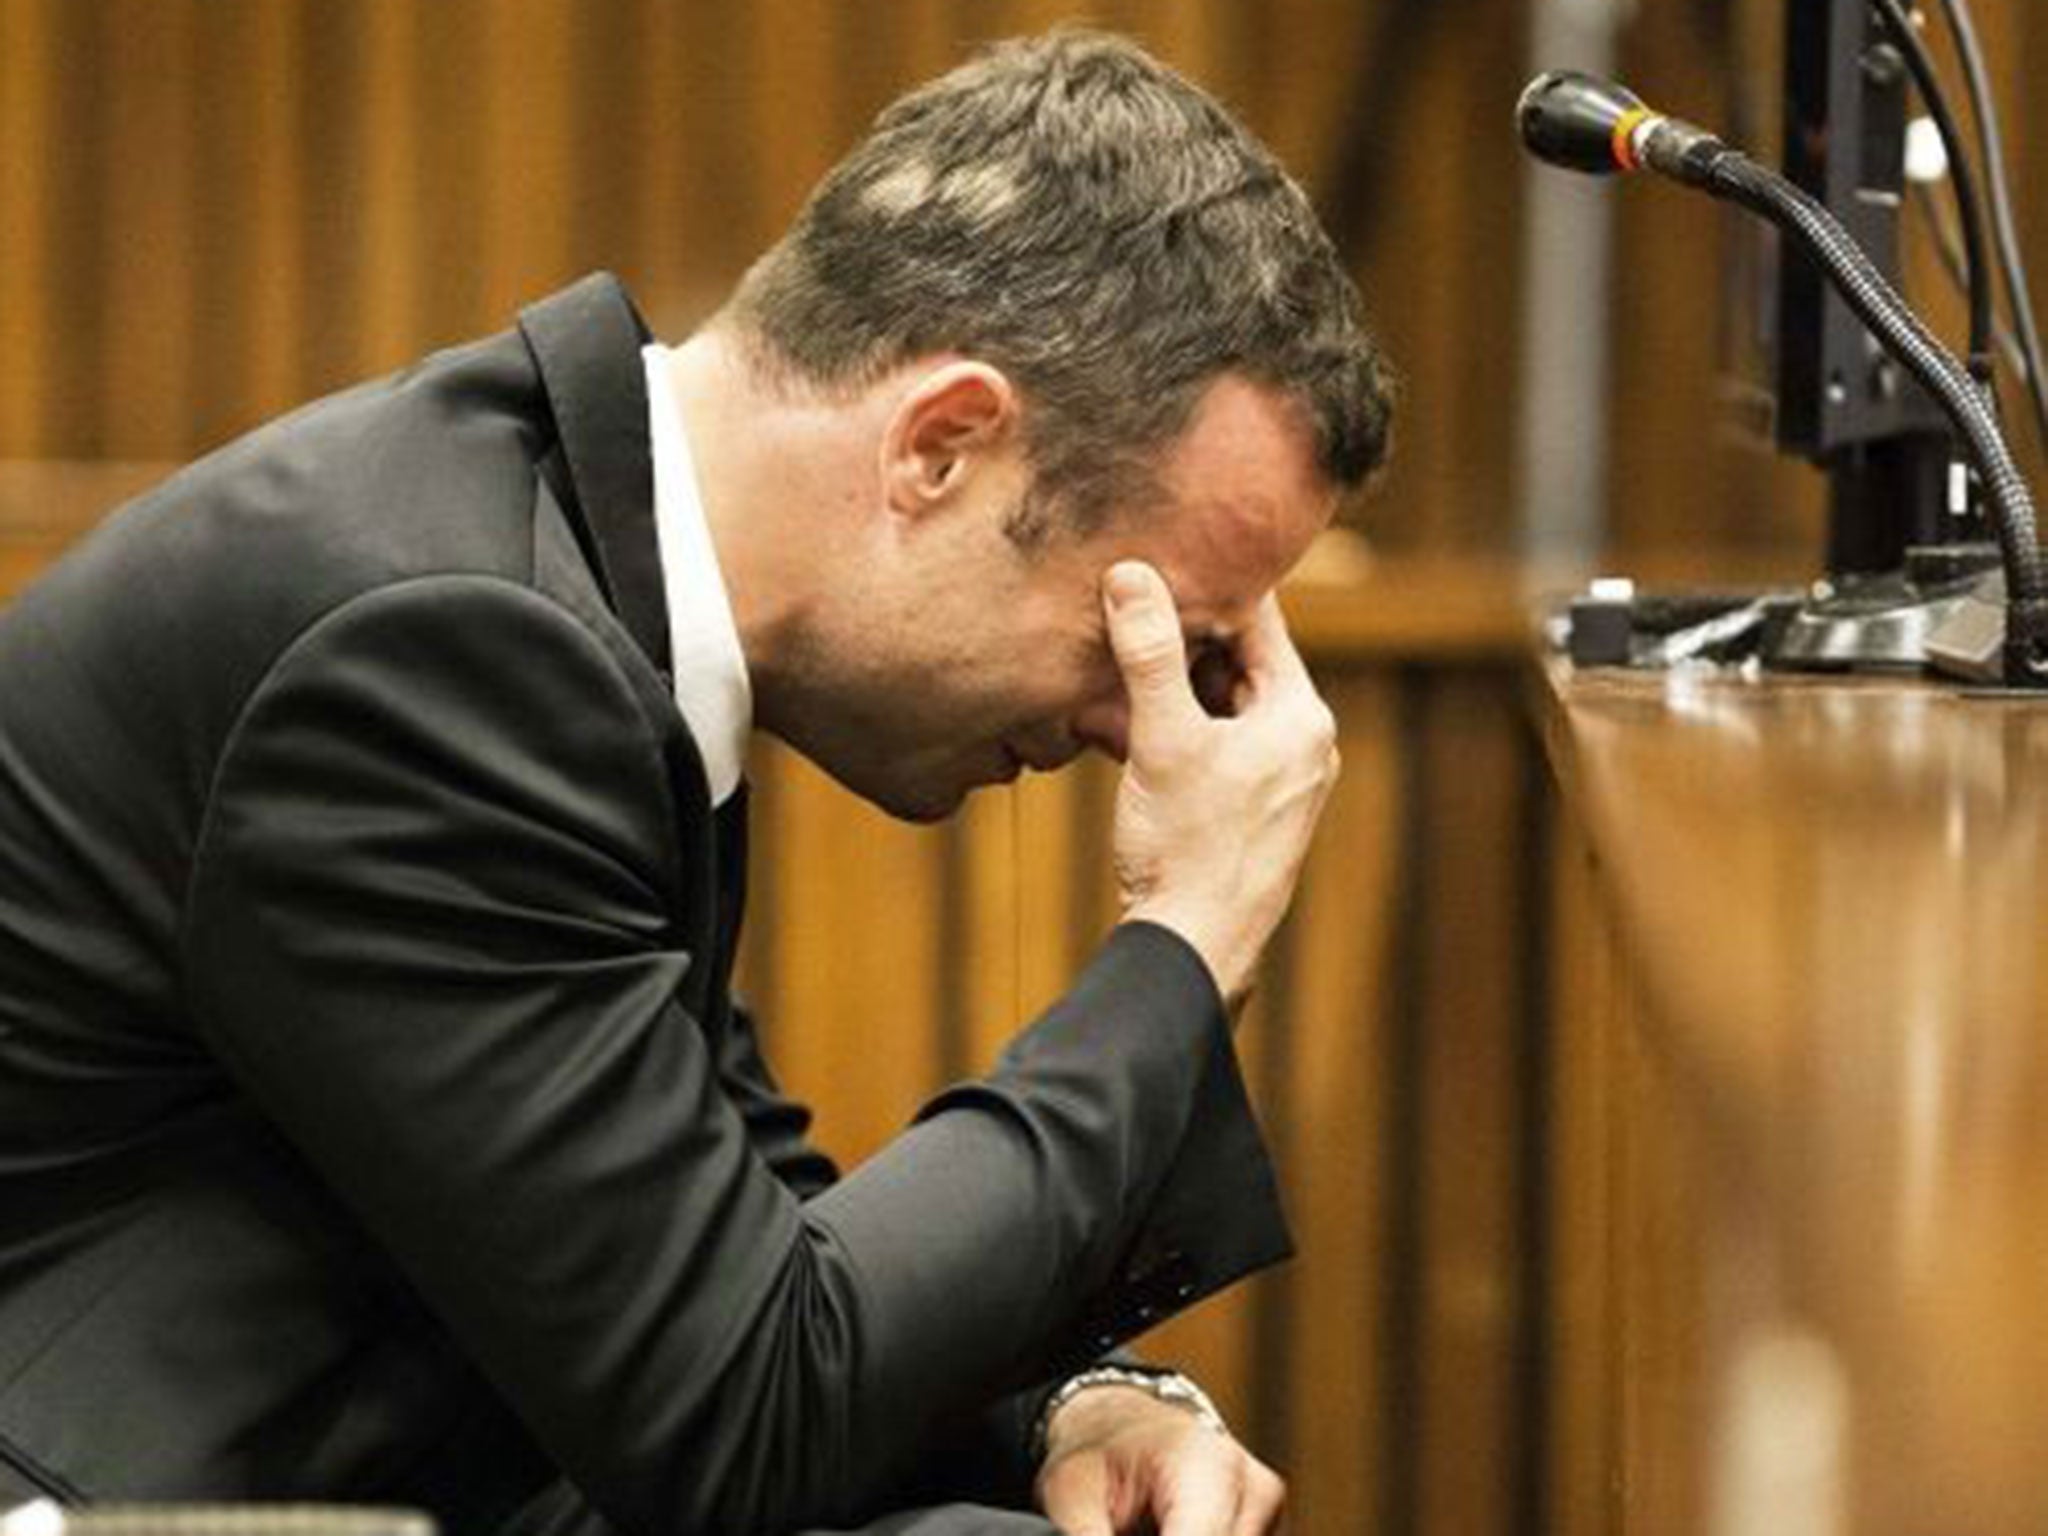 Oscar Pistorius during the fourth day of his trial for the murder of Reeva Steenkamp